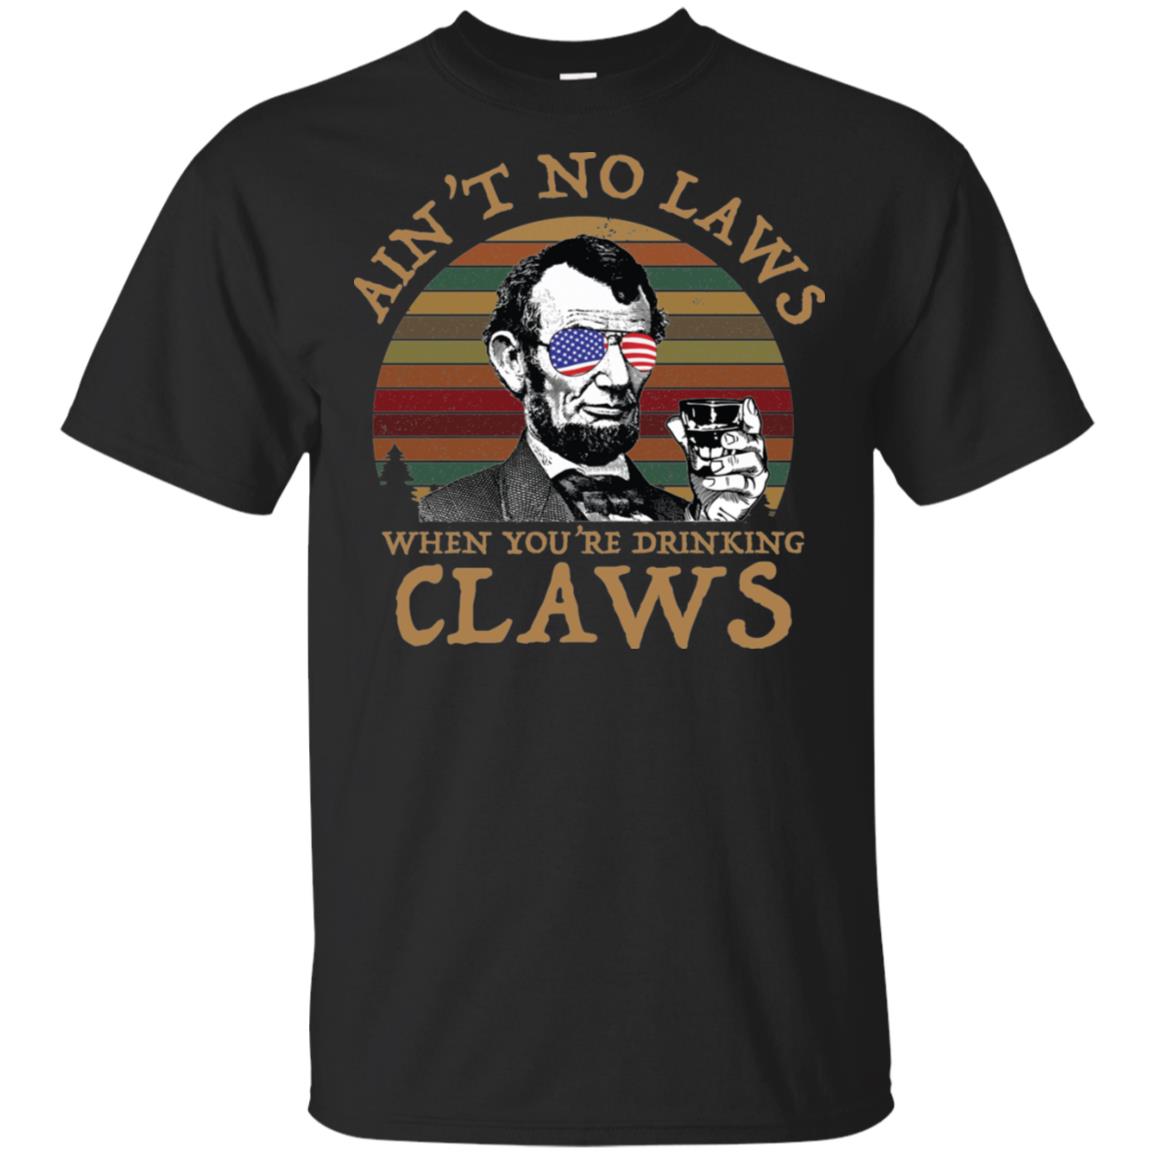 Abraham Lincoln – Ain't No Laws When You're Drinking Claws Shirt